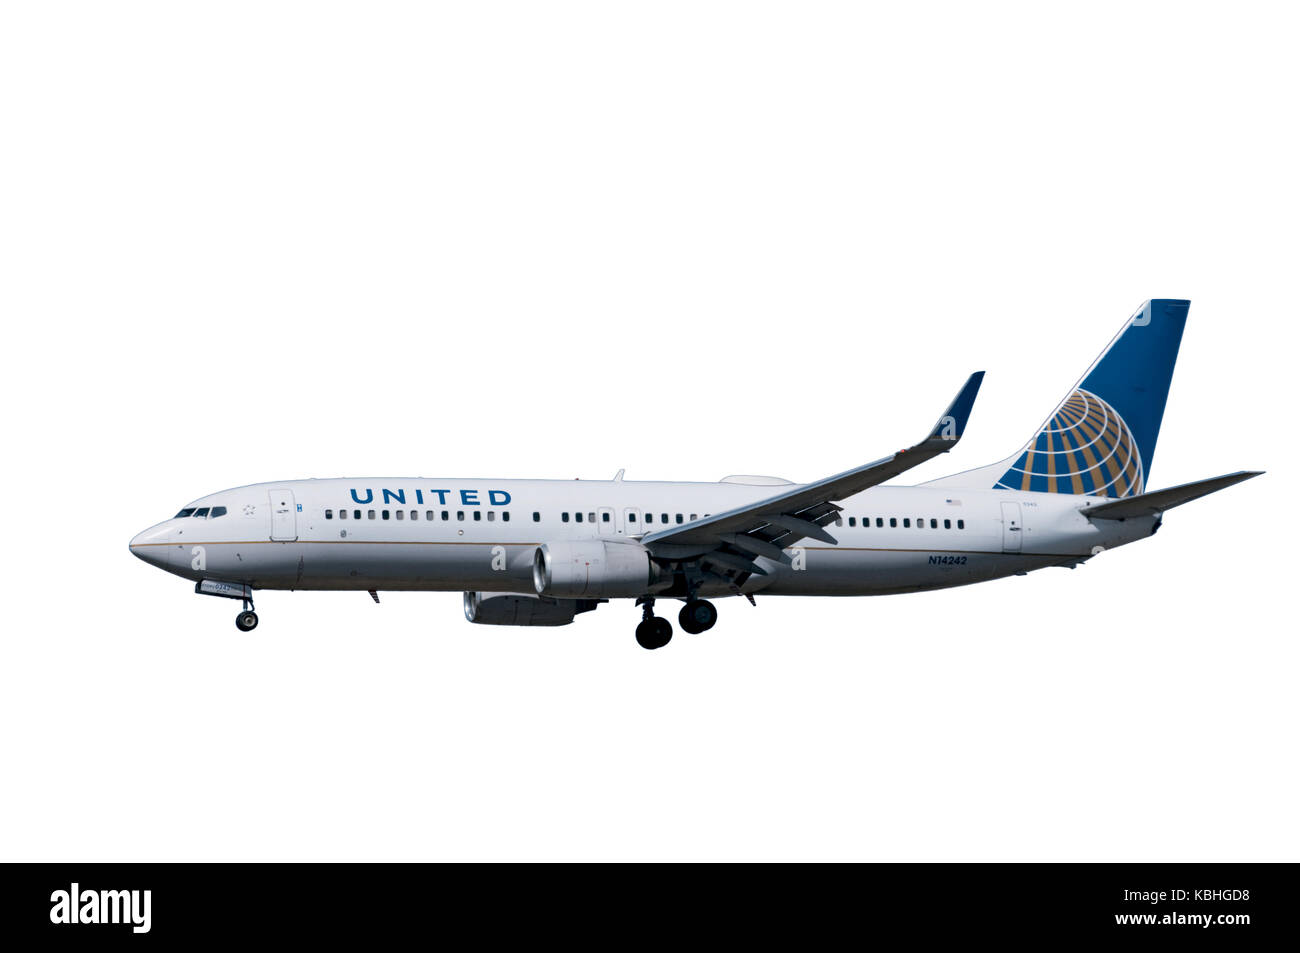 United Airlines 737 Jet Landung am Flughafen LAX Cut-out Stockfoto